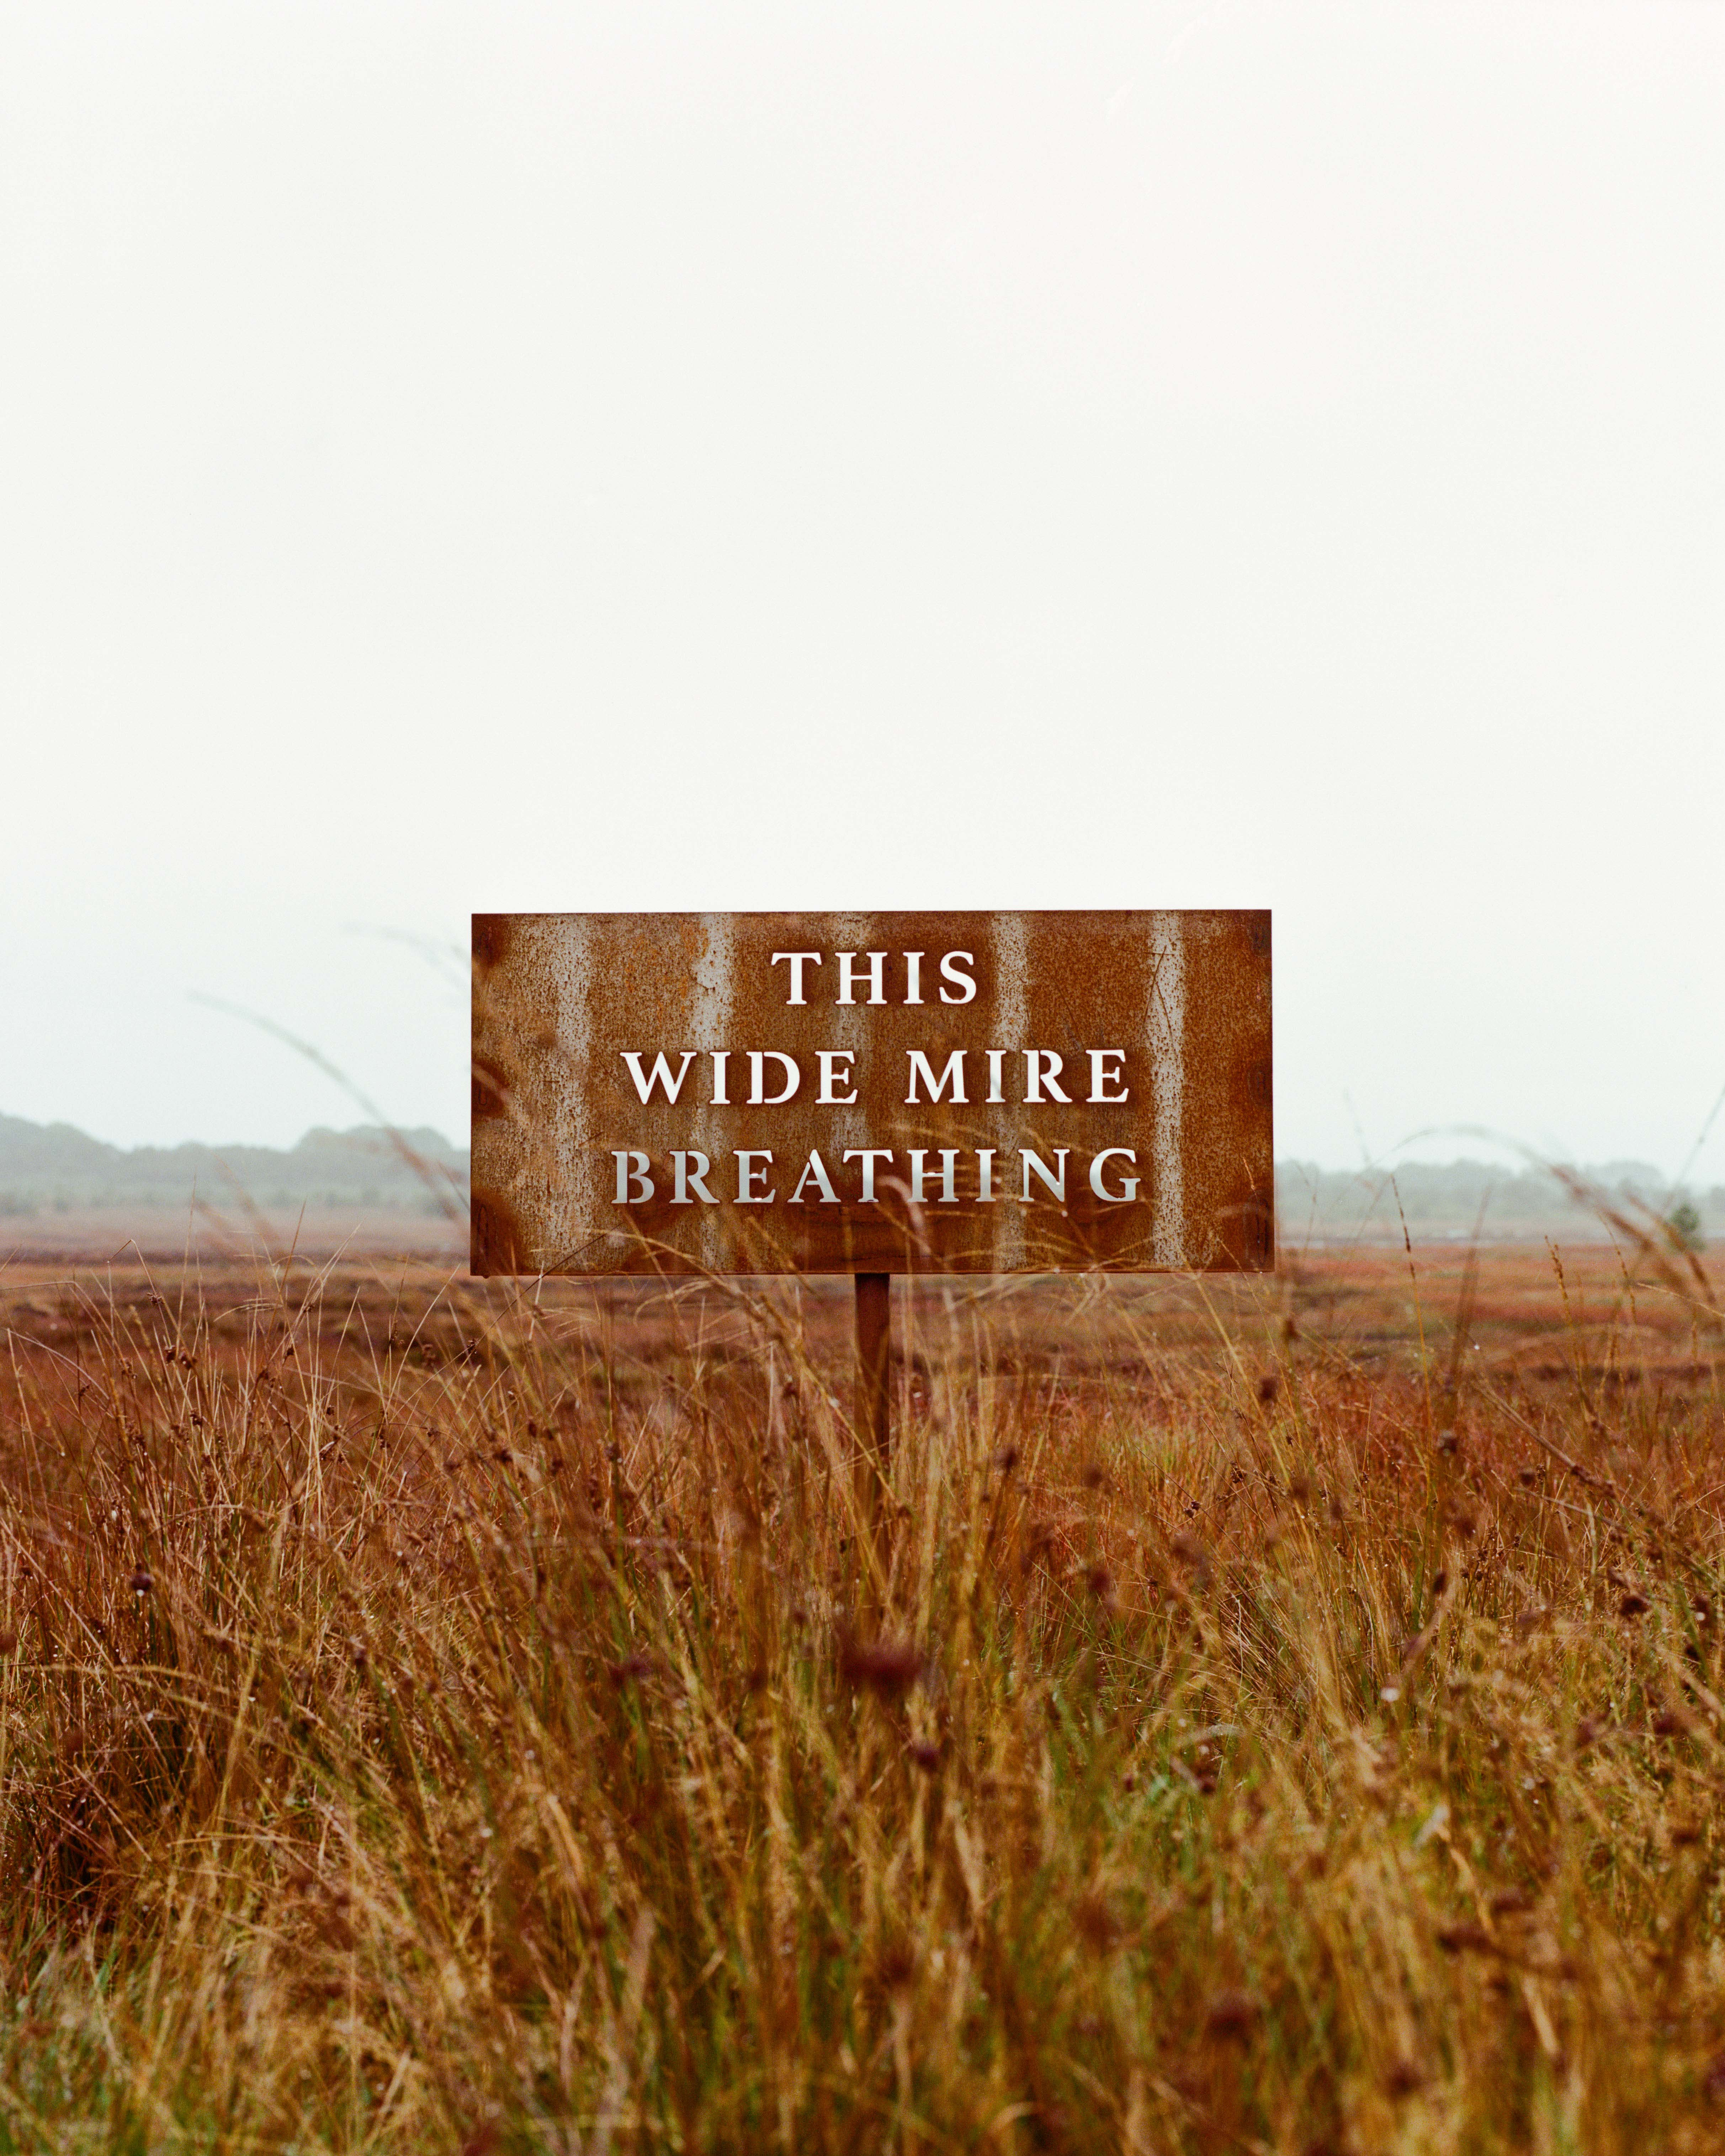 A rusted metal sign on a peat bog, with words cut into it: THIS WIDE MIRE BREATHING